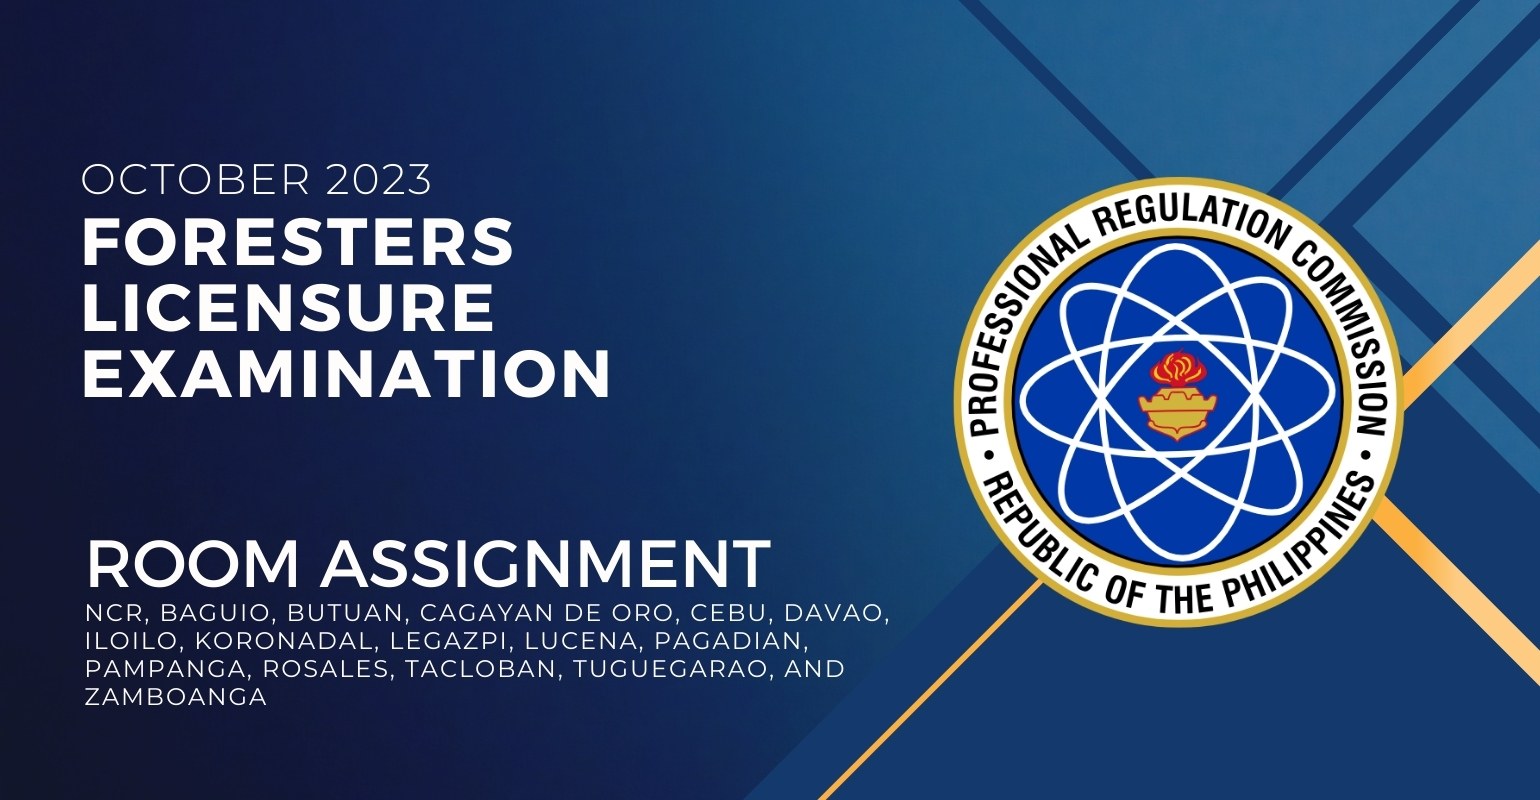 room assignment october 2023 foresters licensure exam